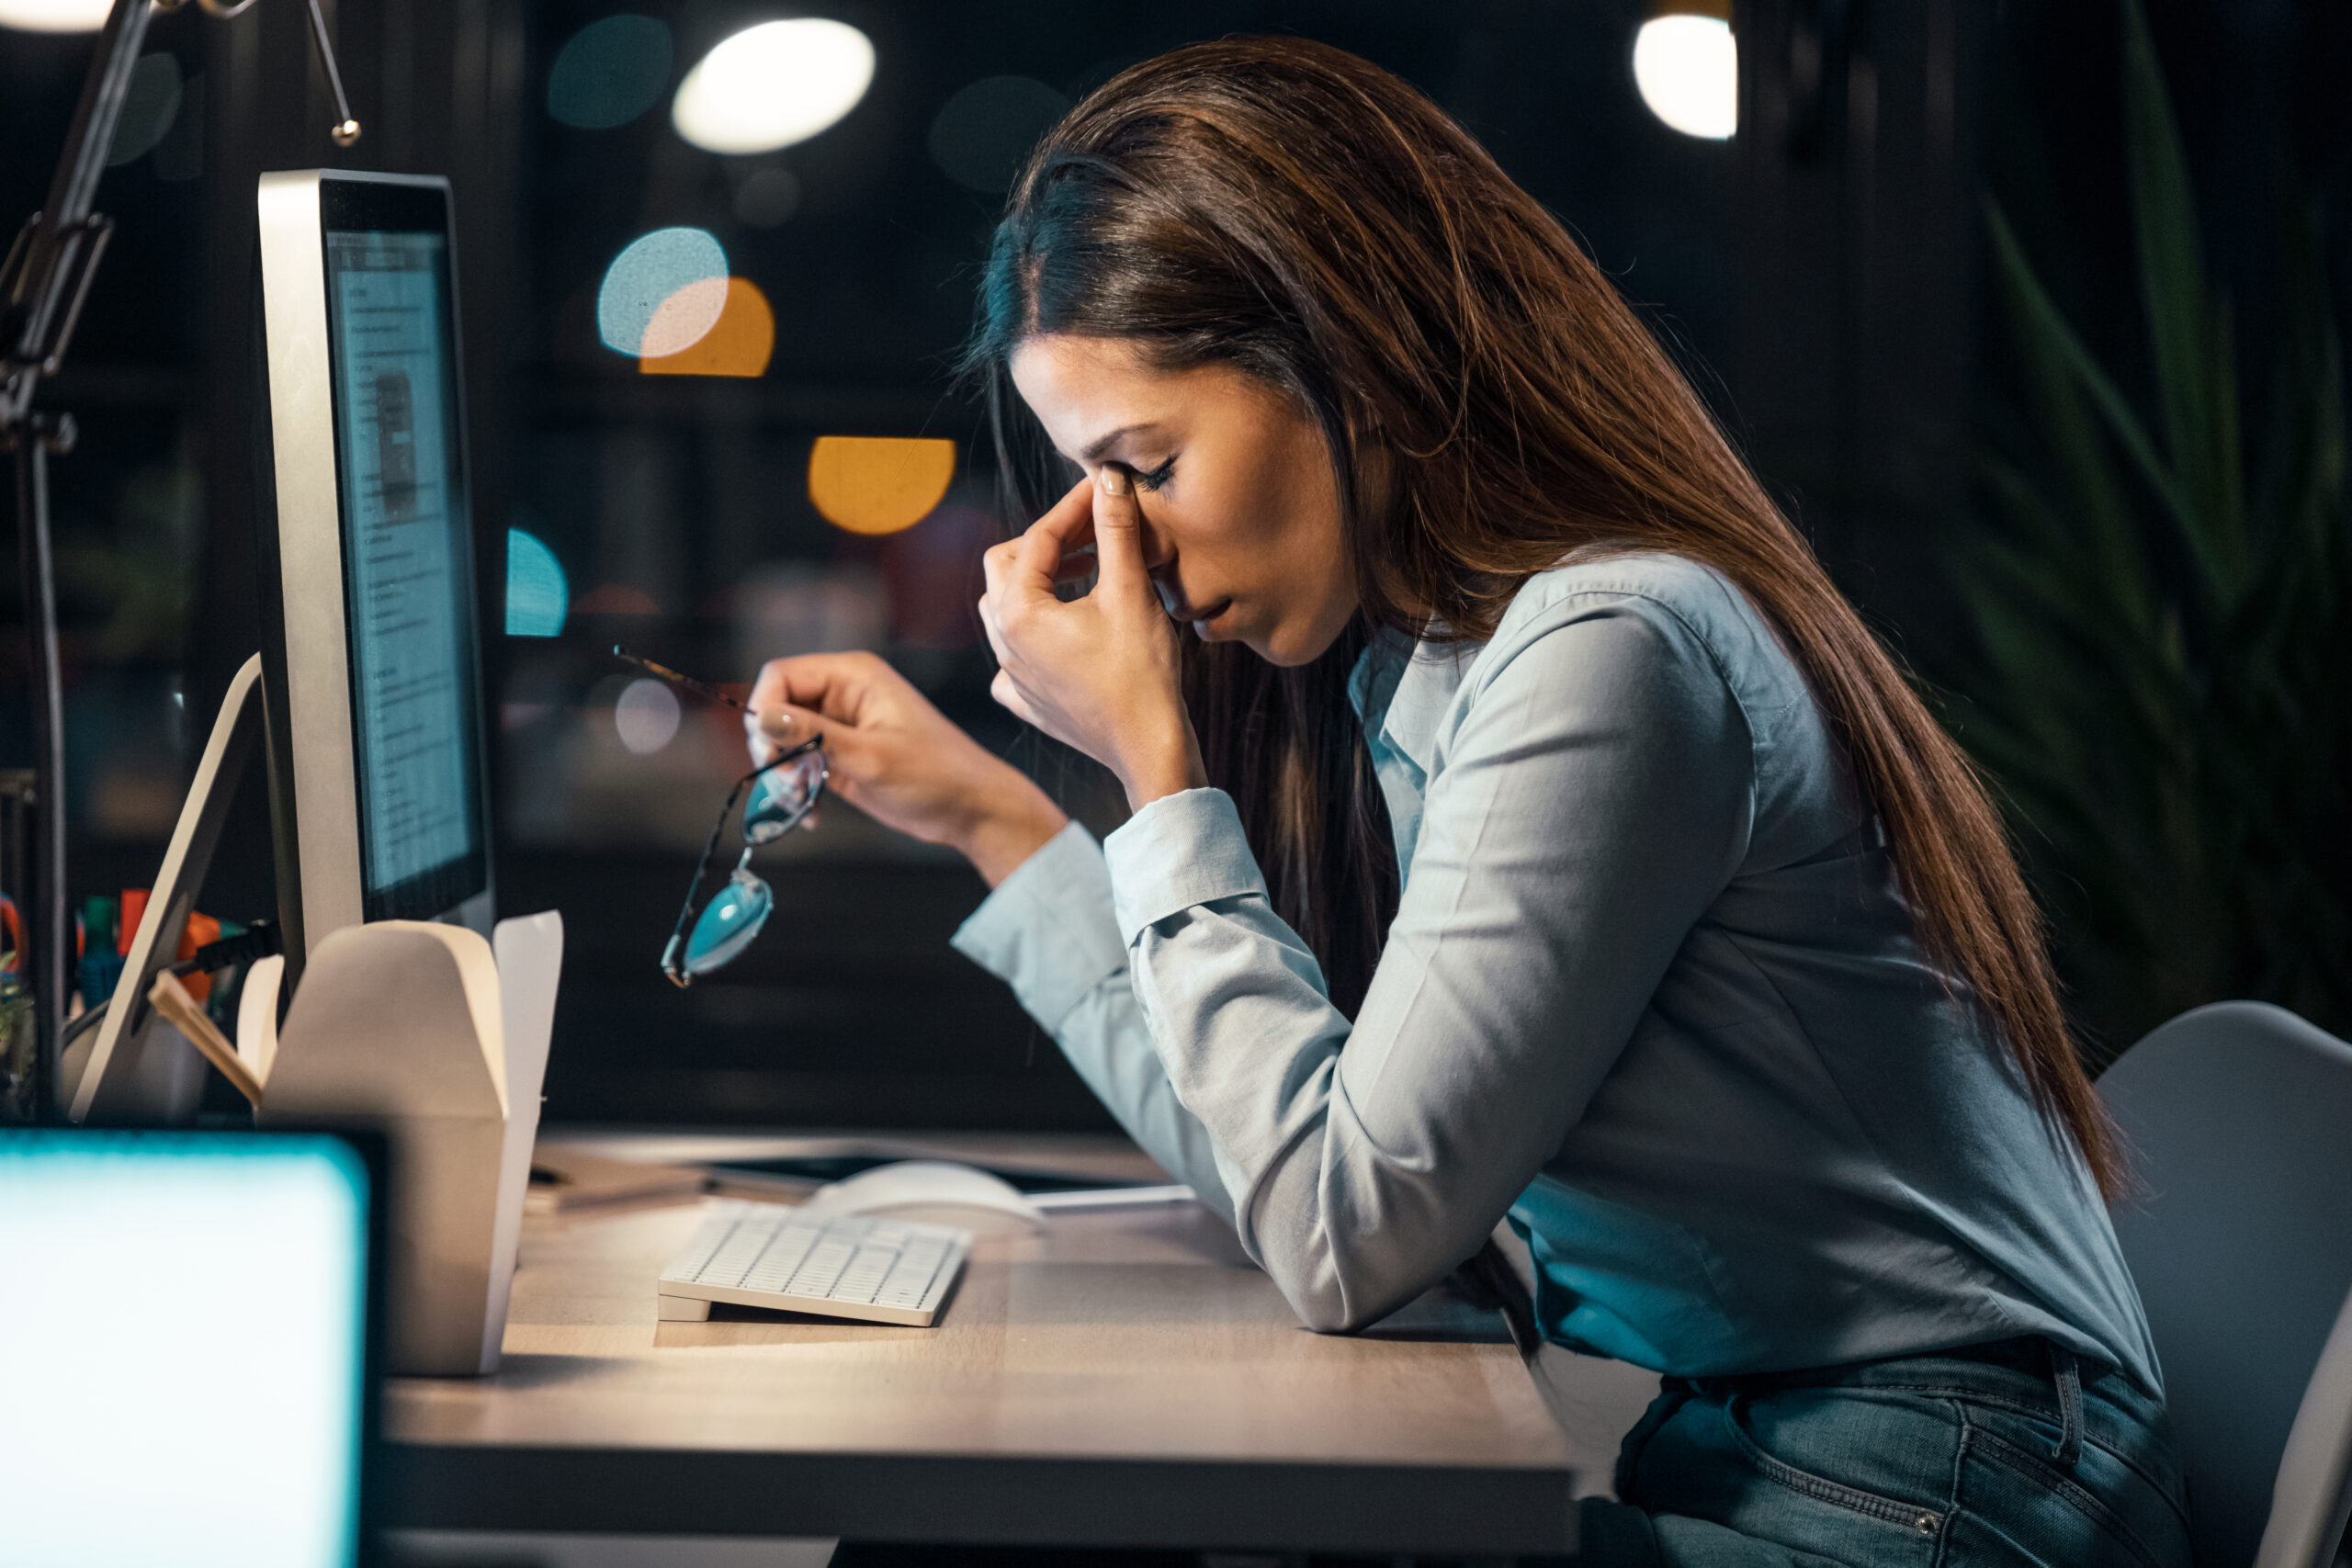 Woman at work sitting in front her computer rubbing her eyes